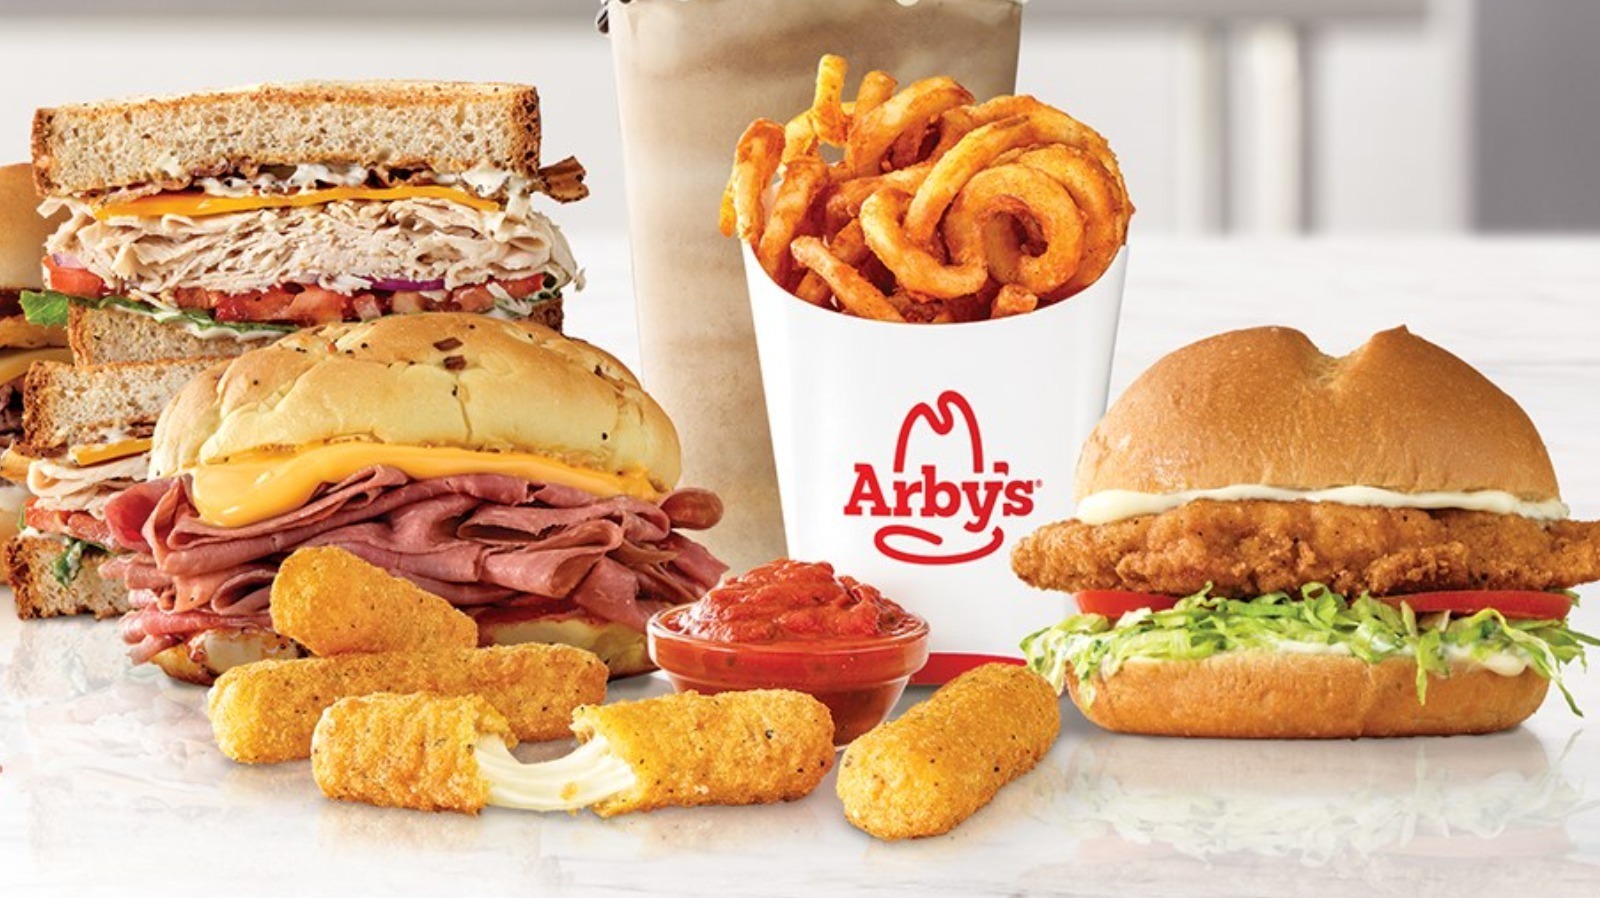 Deals on Sandwiches, Curly Fries, and More - wide 4